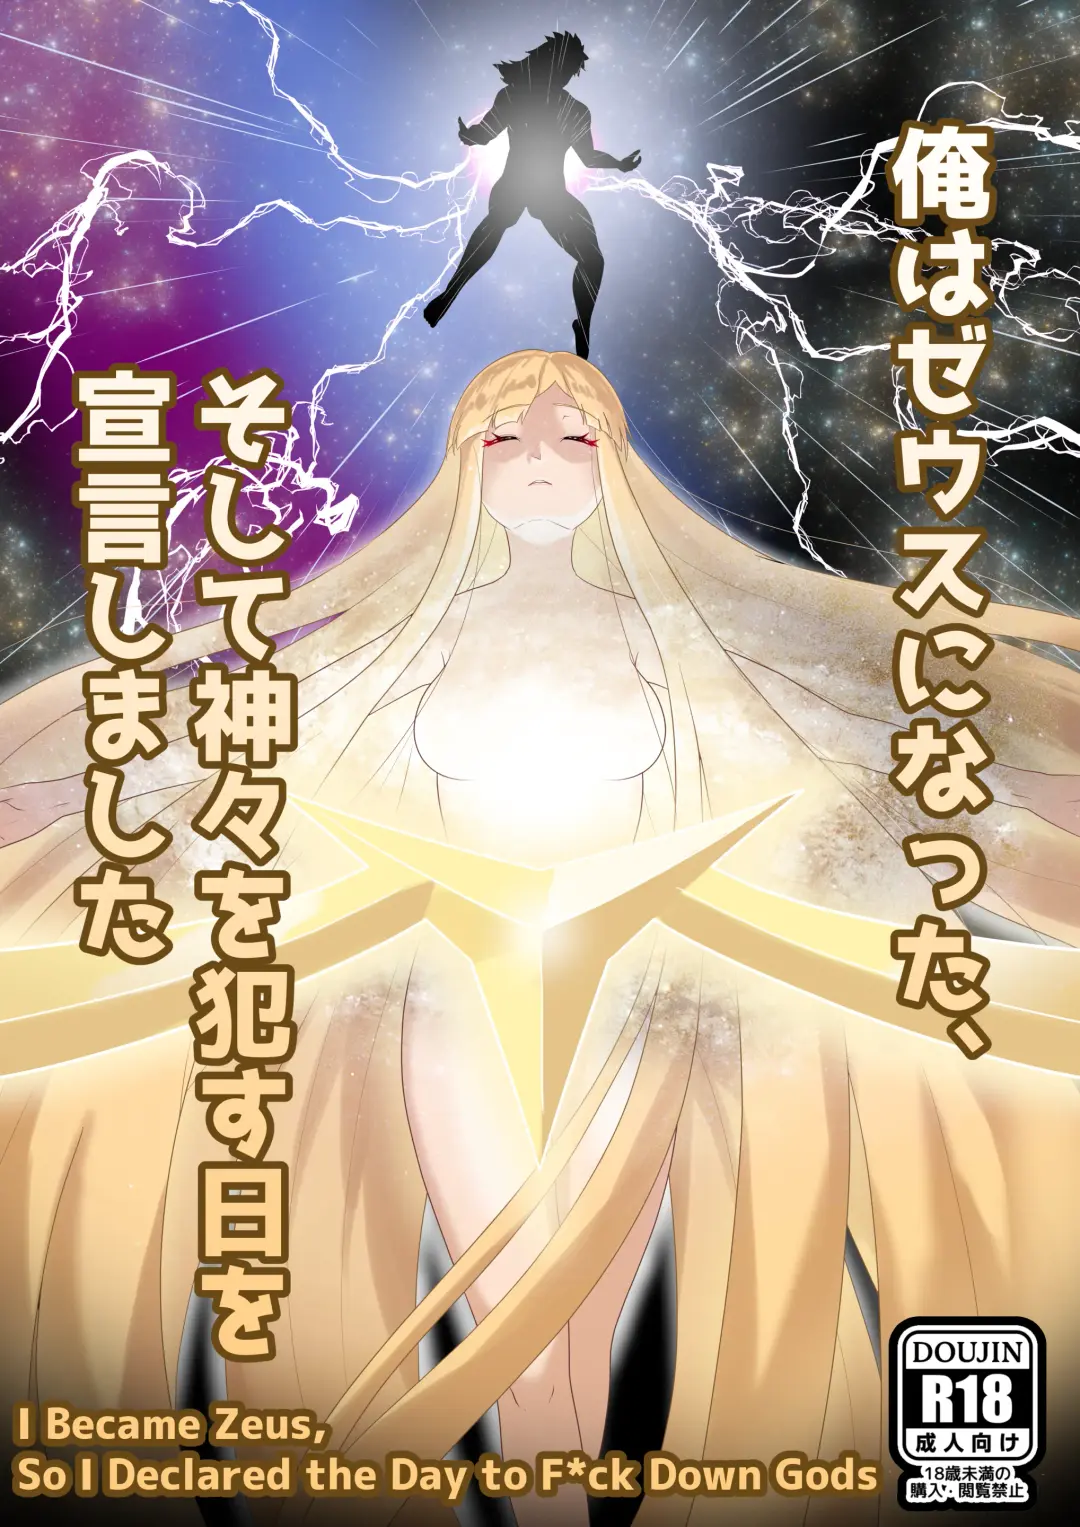 Read [Kmvt] I Became Zeus, So I Declared the Day to F*ck Down Gods - Fhentai.net